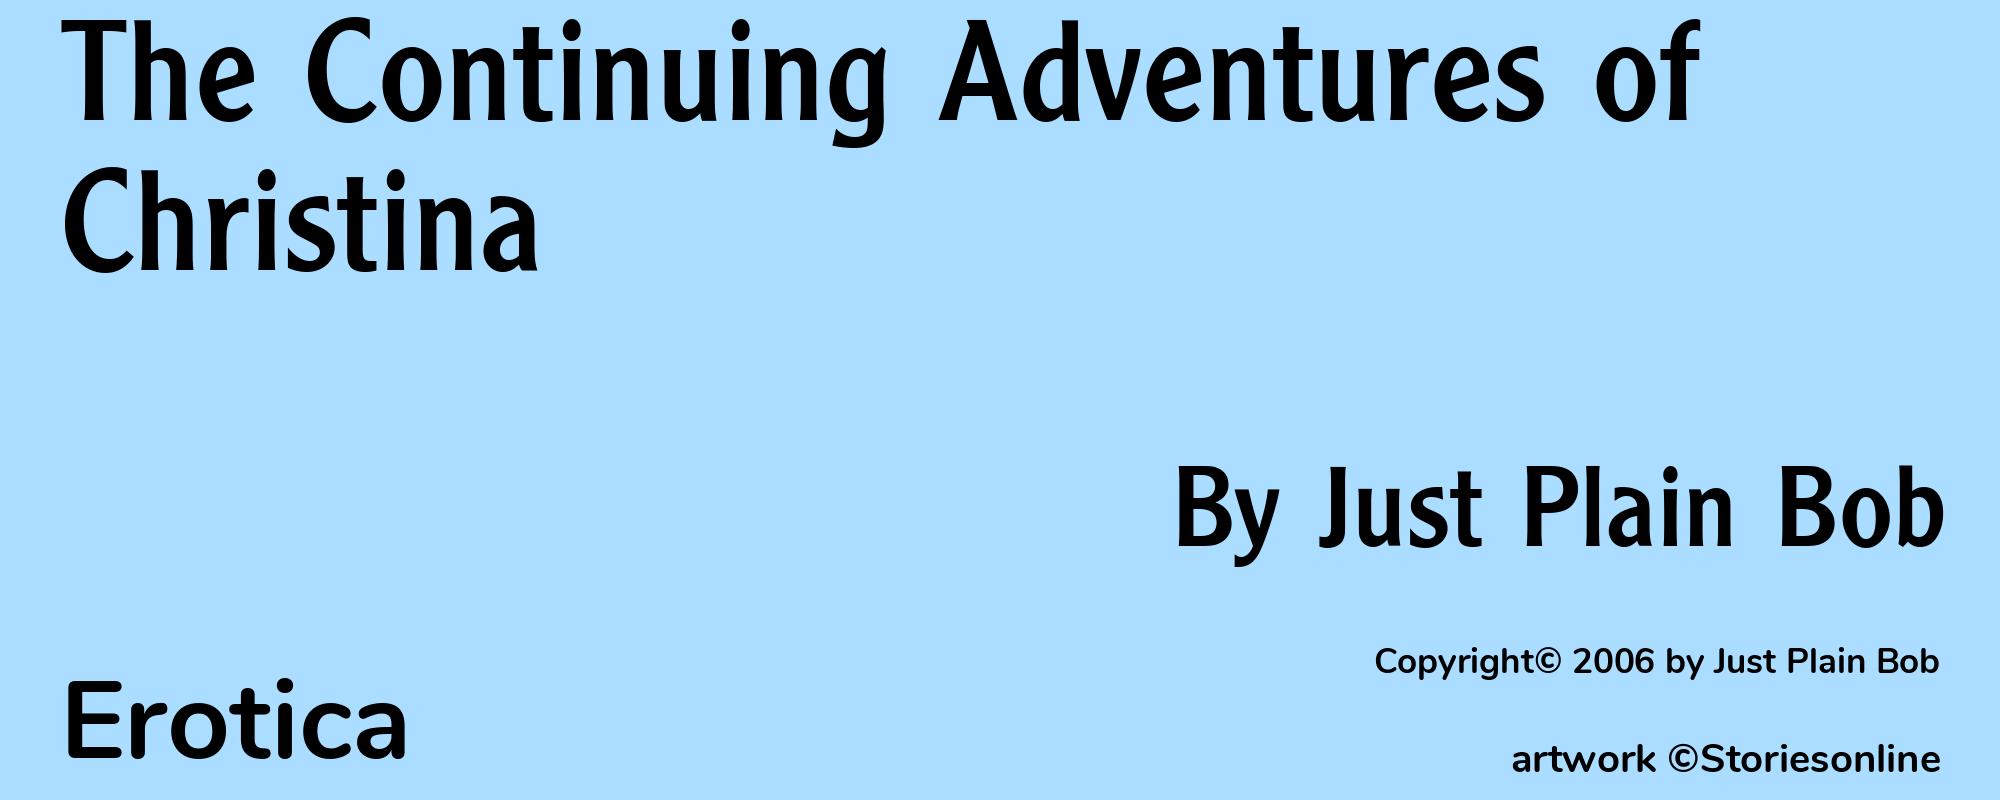 The Continuing Adventures of Christina - Cover